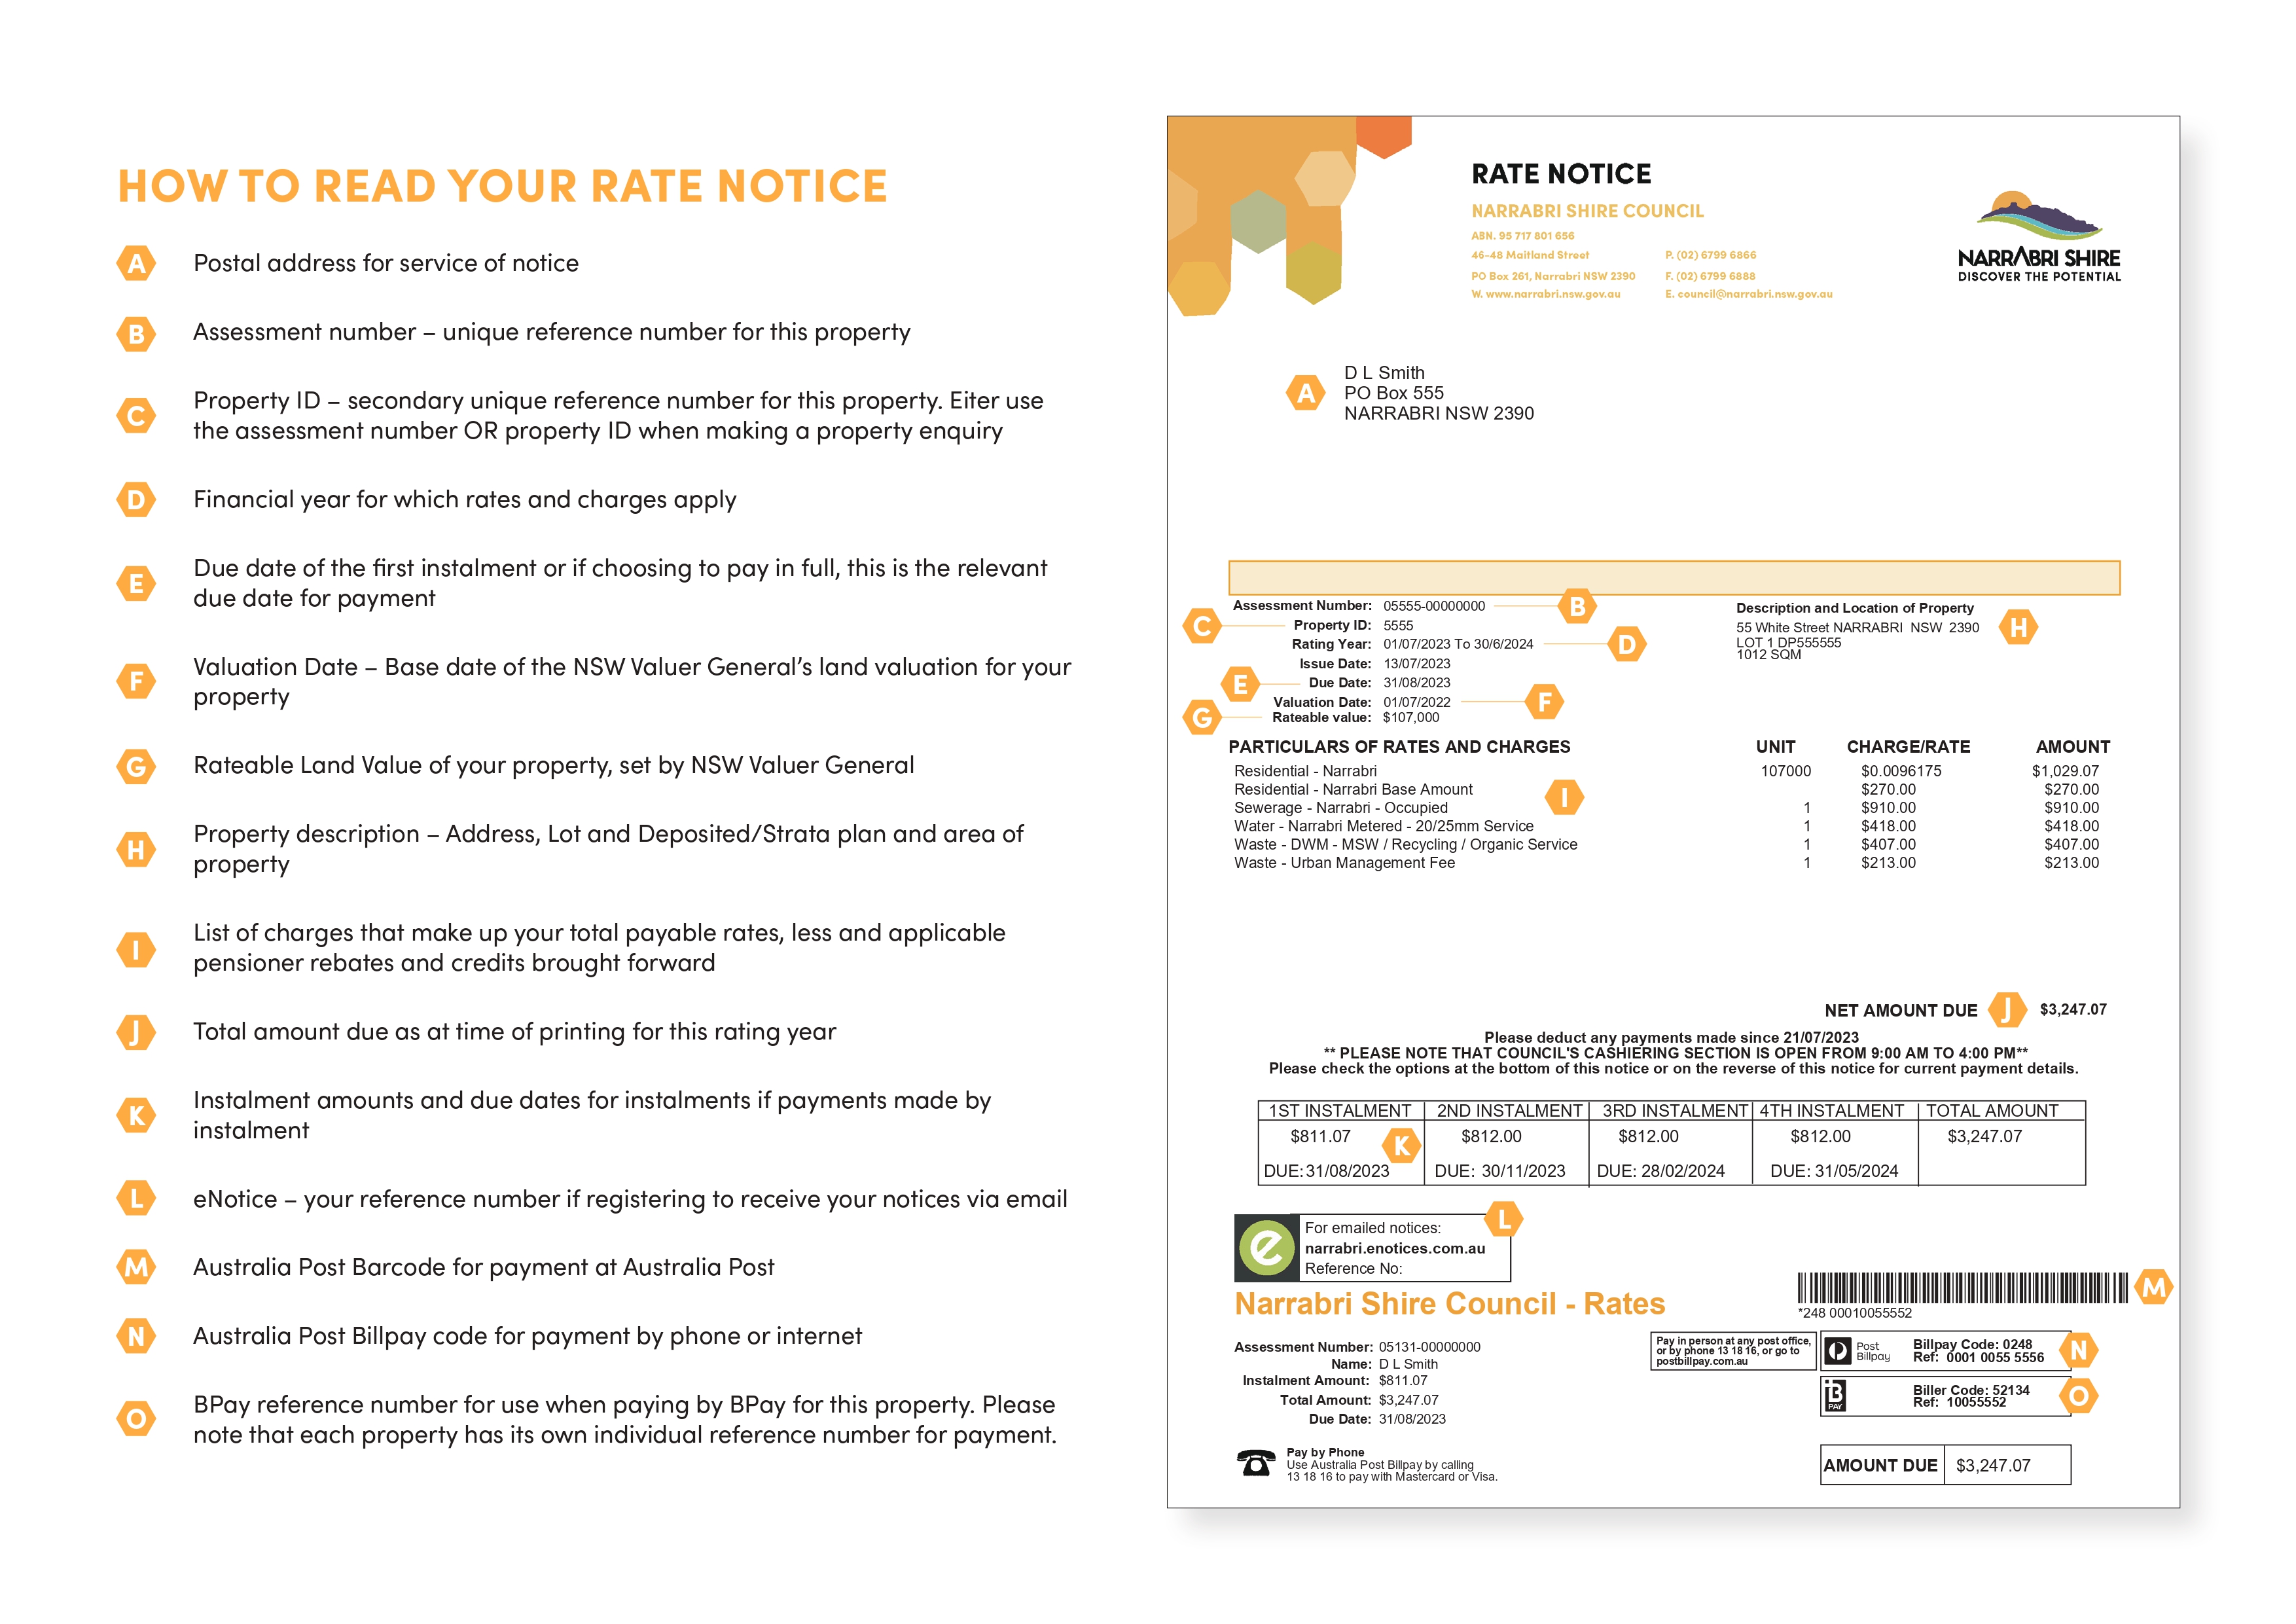 How to read your rate notice.jpg